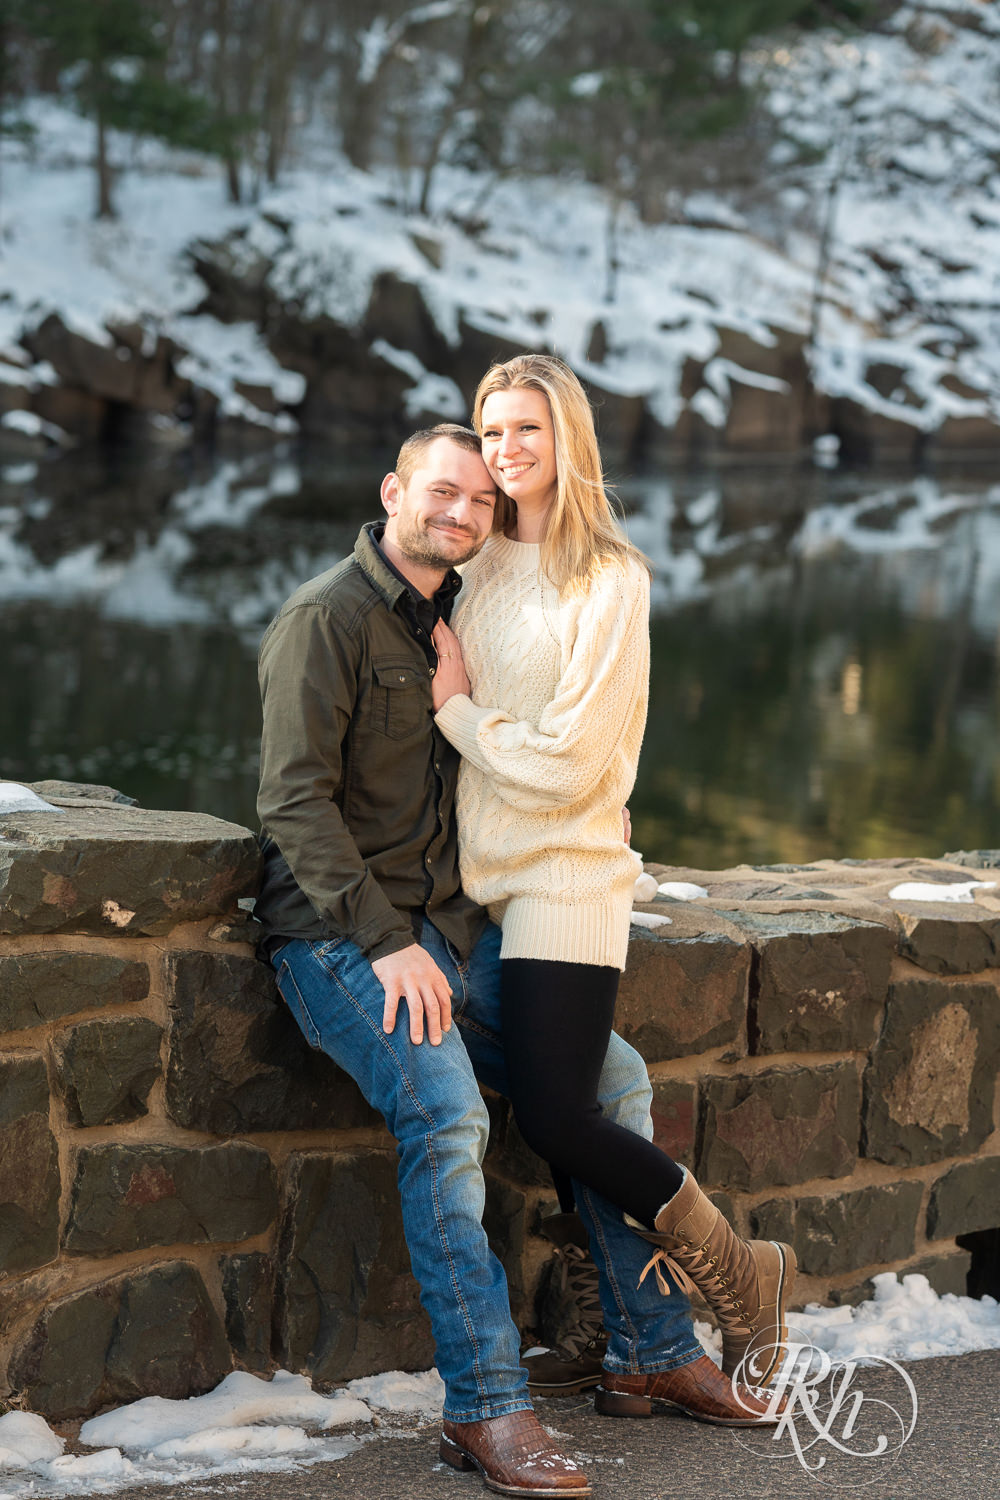 Man in jeans and green shirt and woman in a white sweater smile in front of the river at winter engagement photography session.